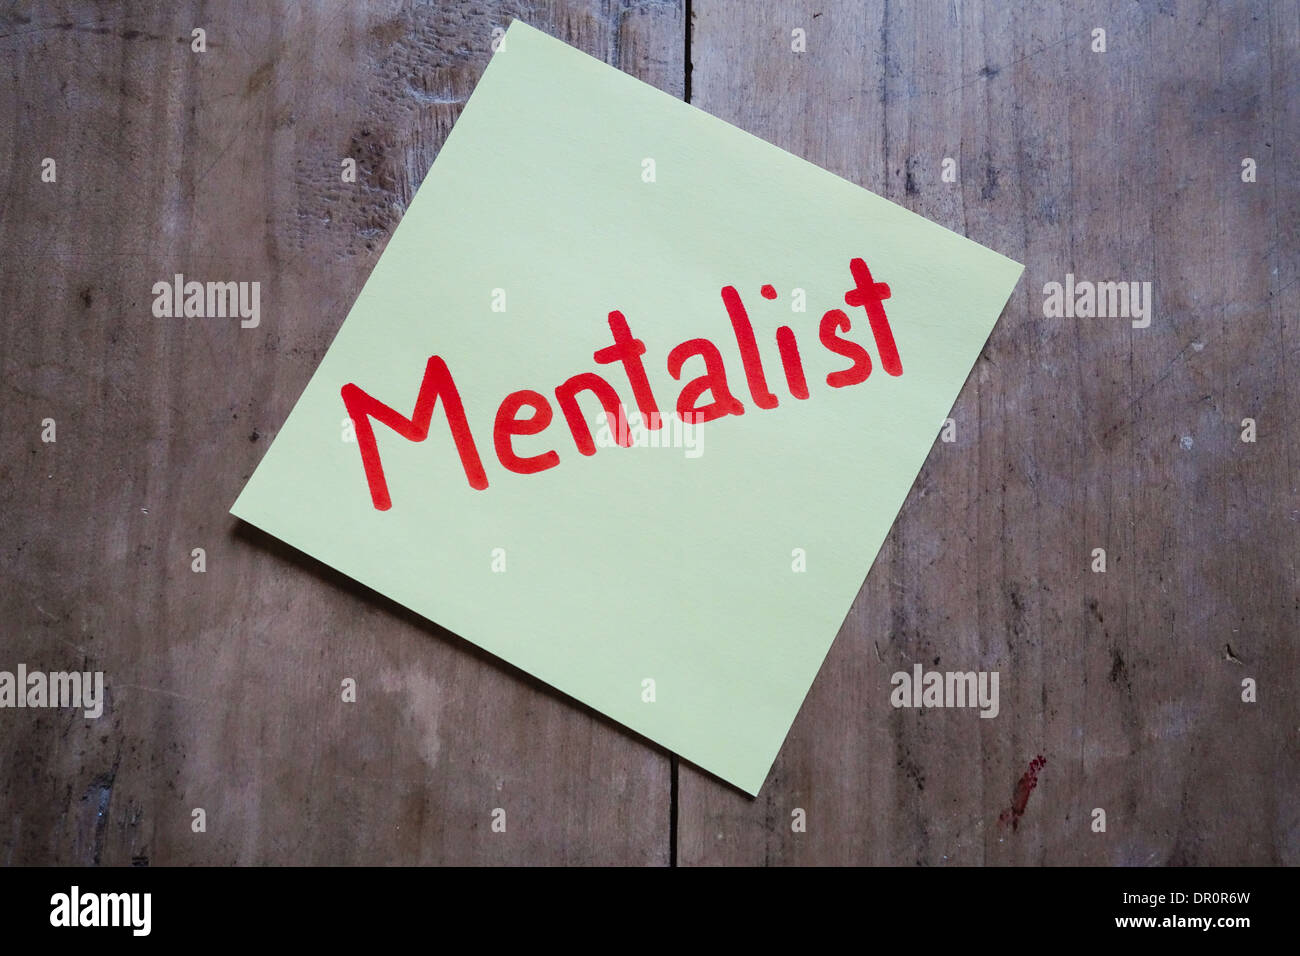 Post it memo on wooden table, Mentalist Stock Photo